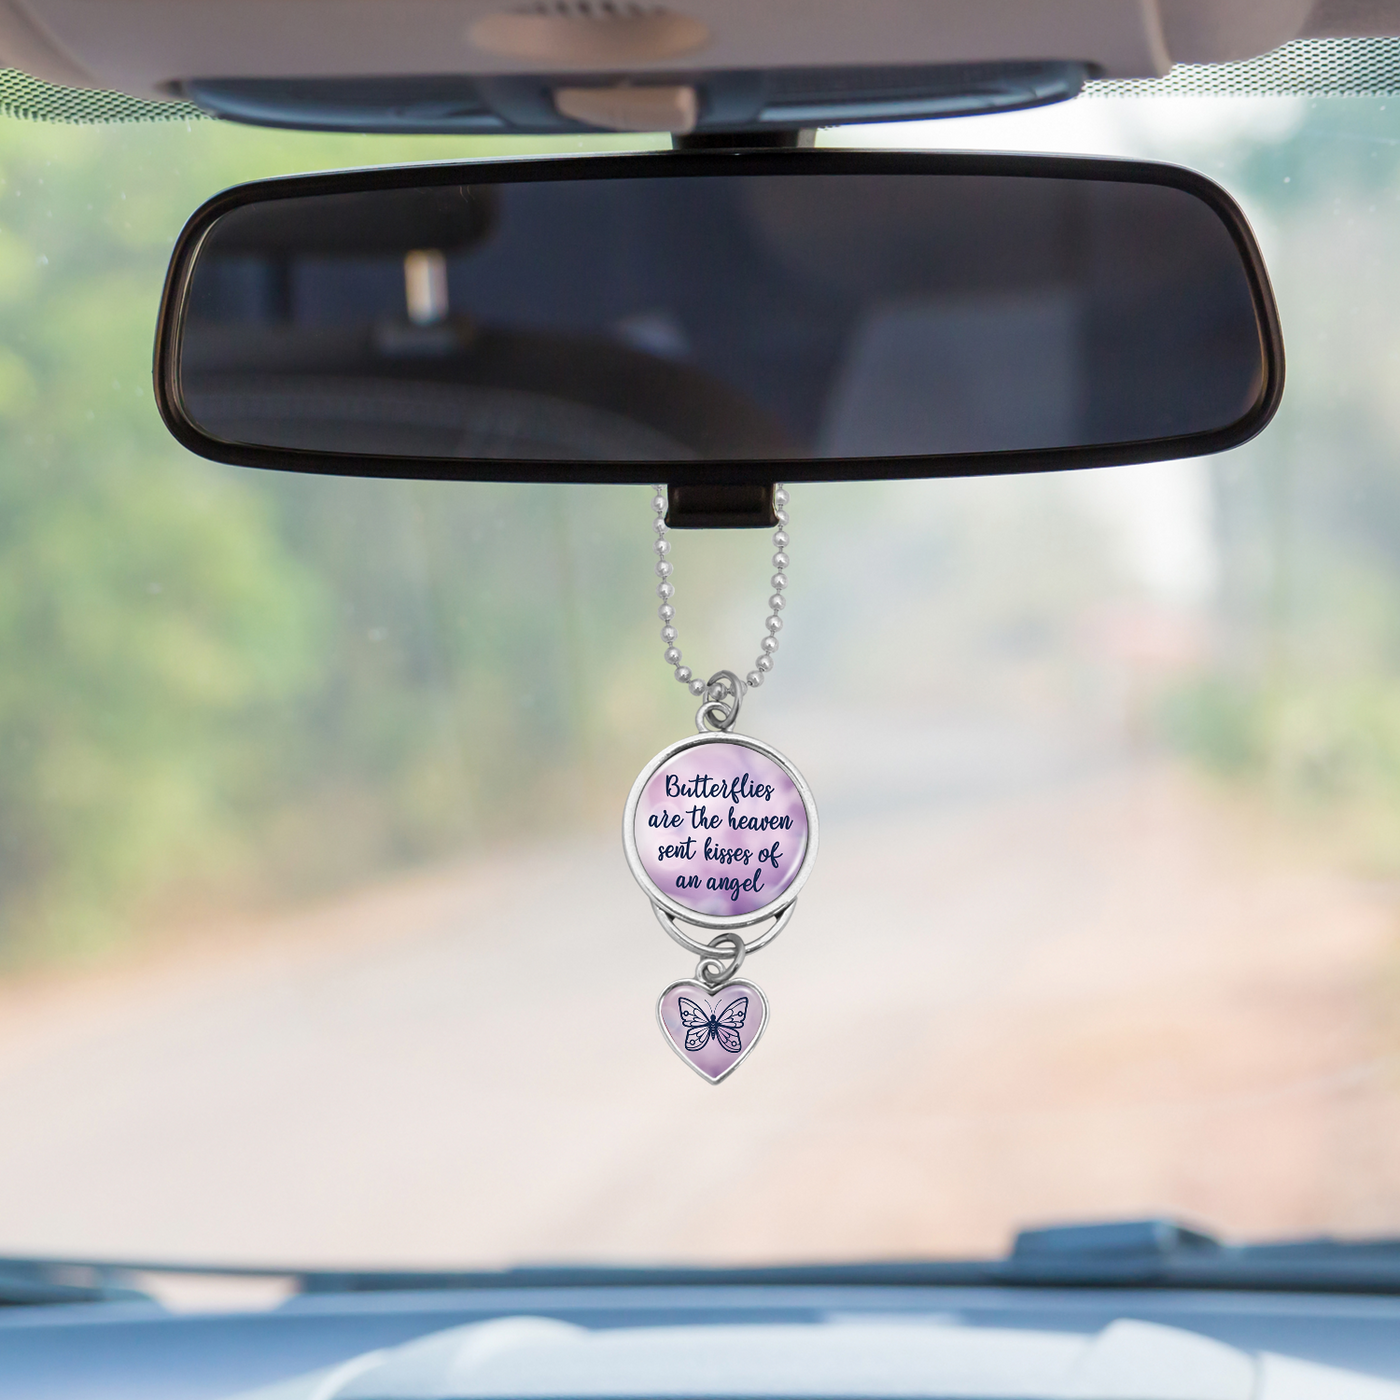 Butterflies Are The Heaven Sent Kisses Of An Angel Rearview Mirror Charm